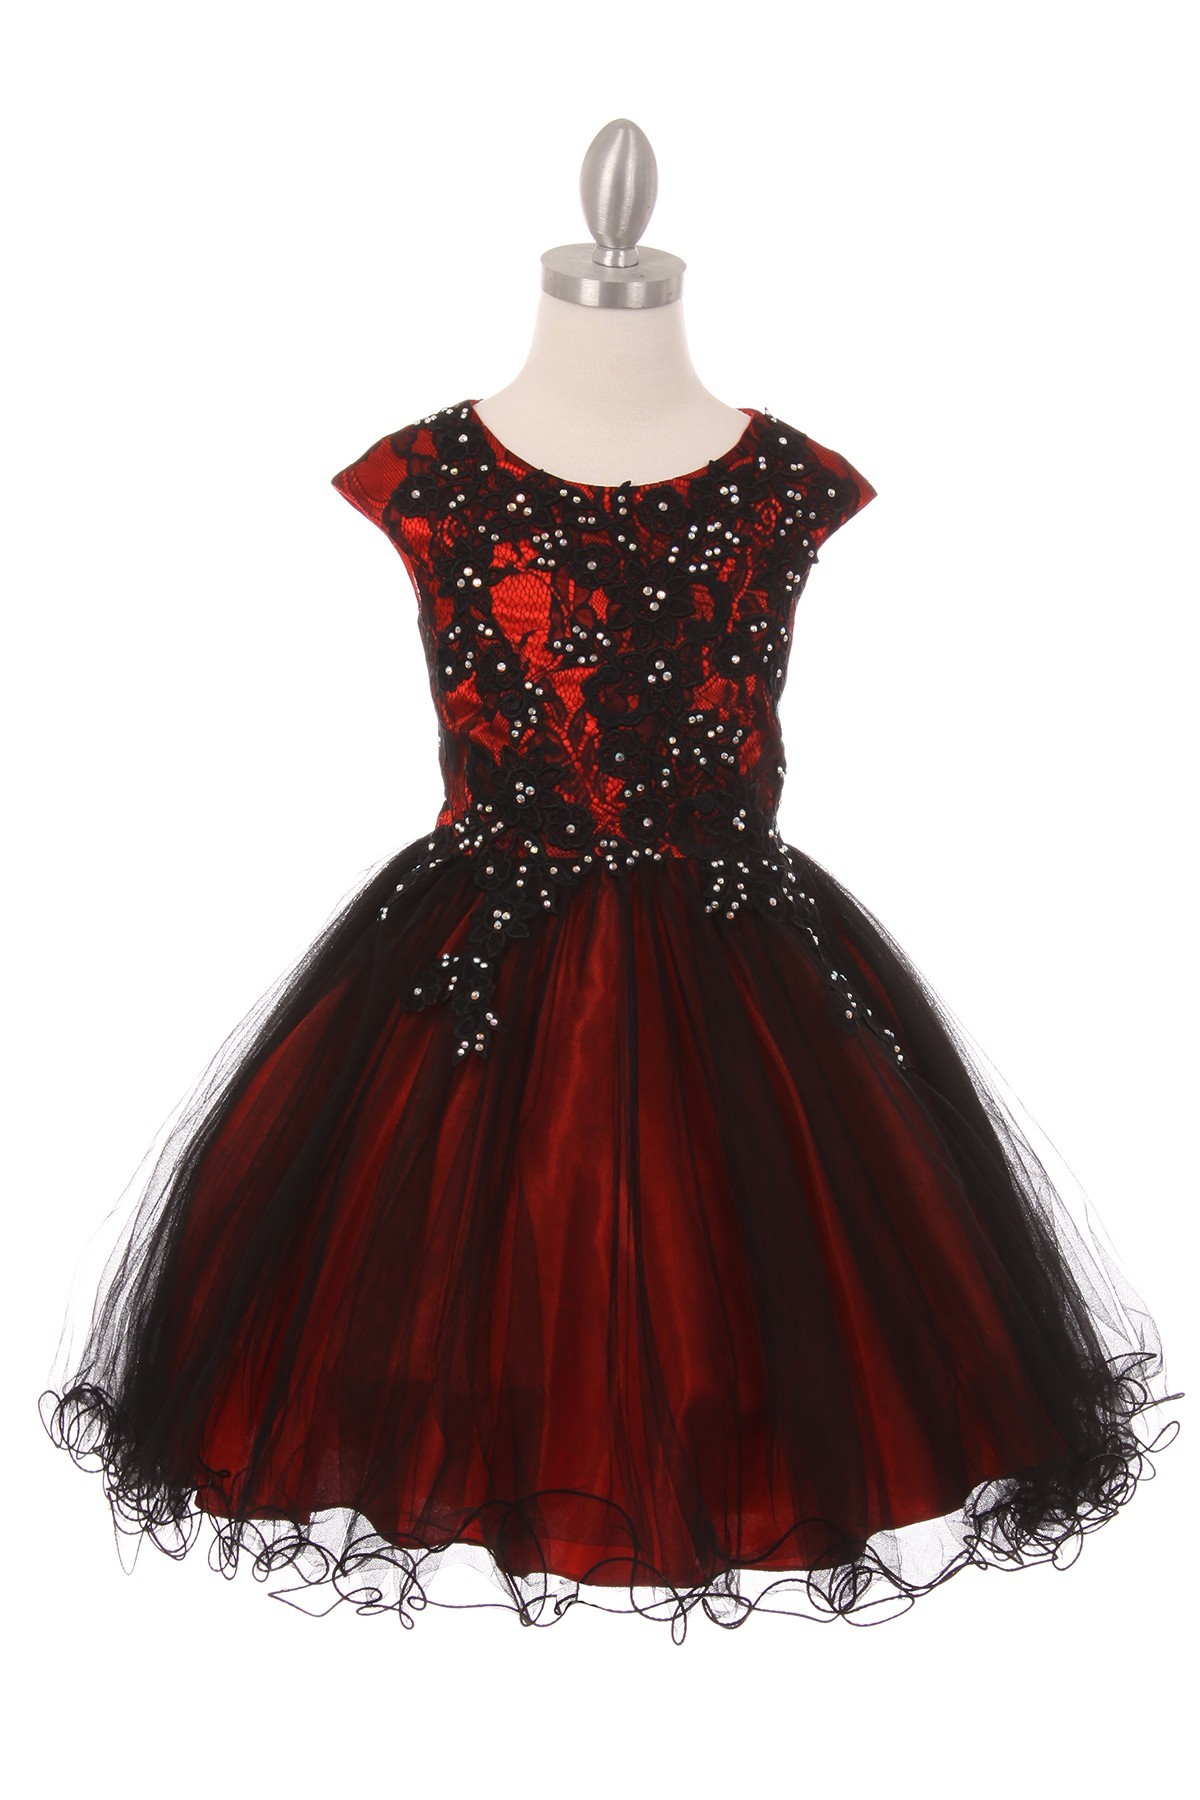 red/black girls christmas party dress